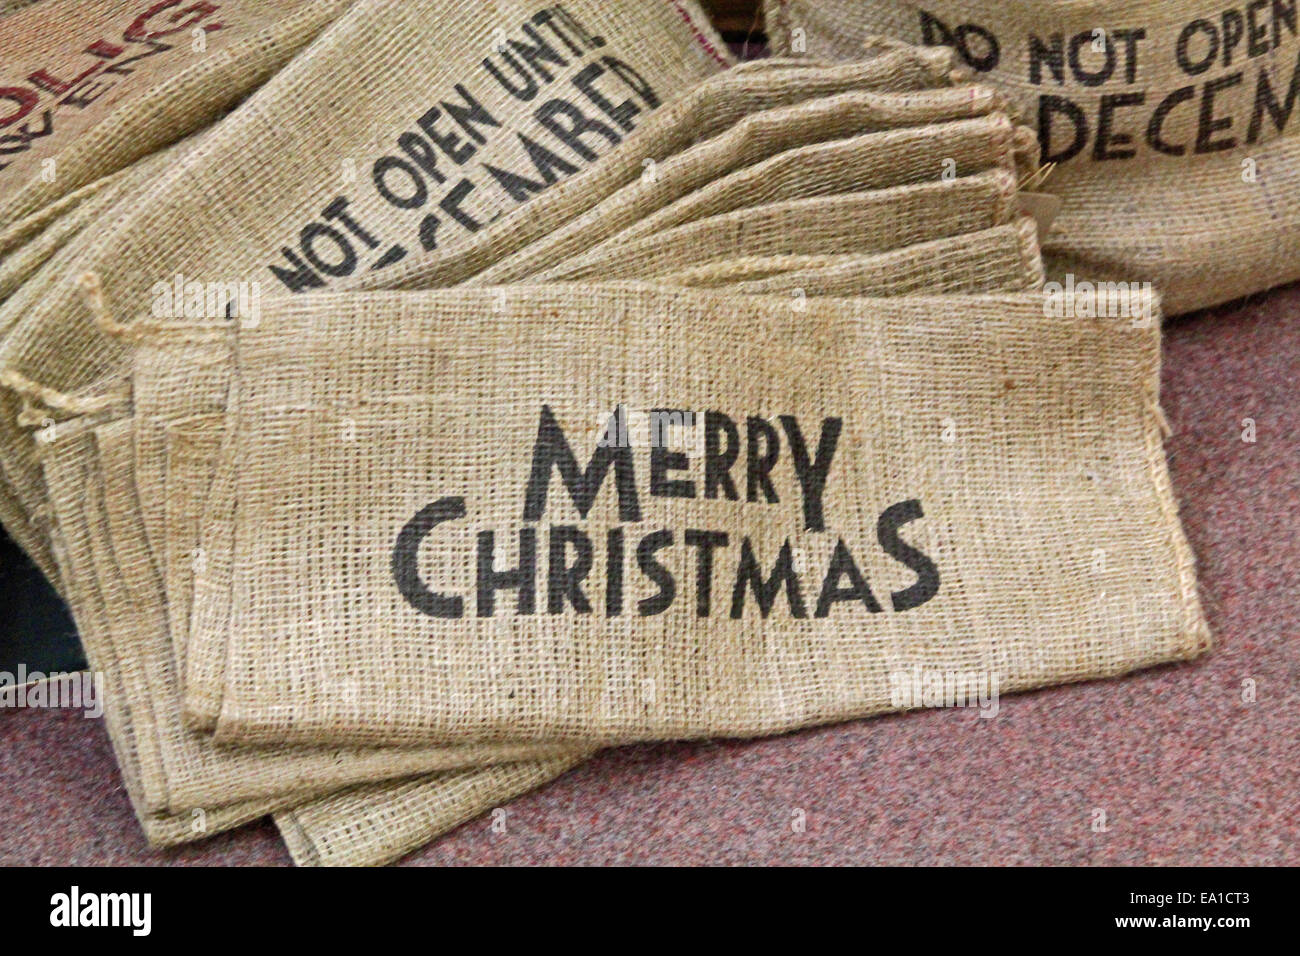 Large pile of hessian sacks with Christmas messages symbolizing Christmas, stockings and Santa delivering presents Stock Photo